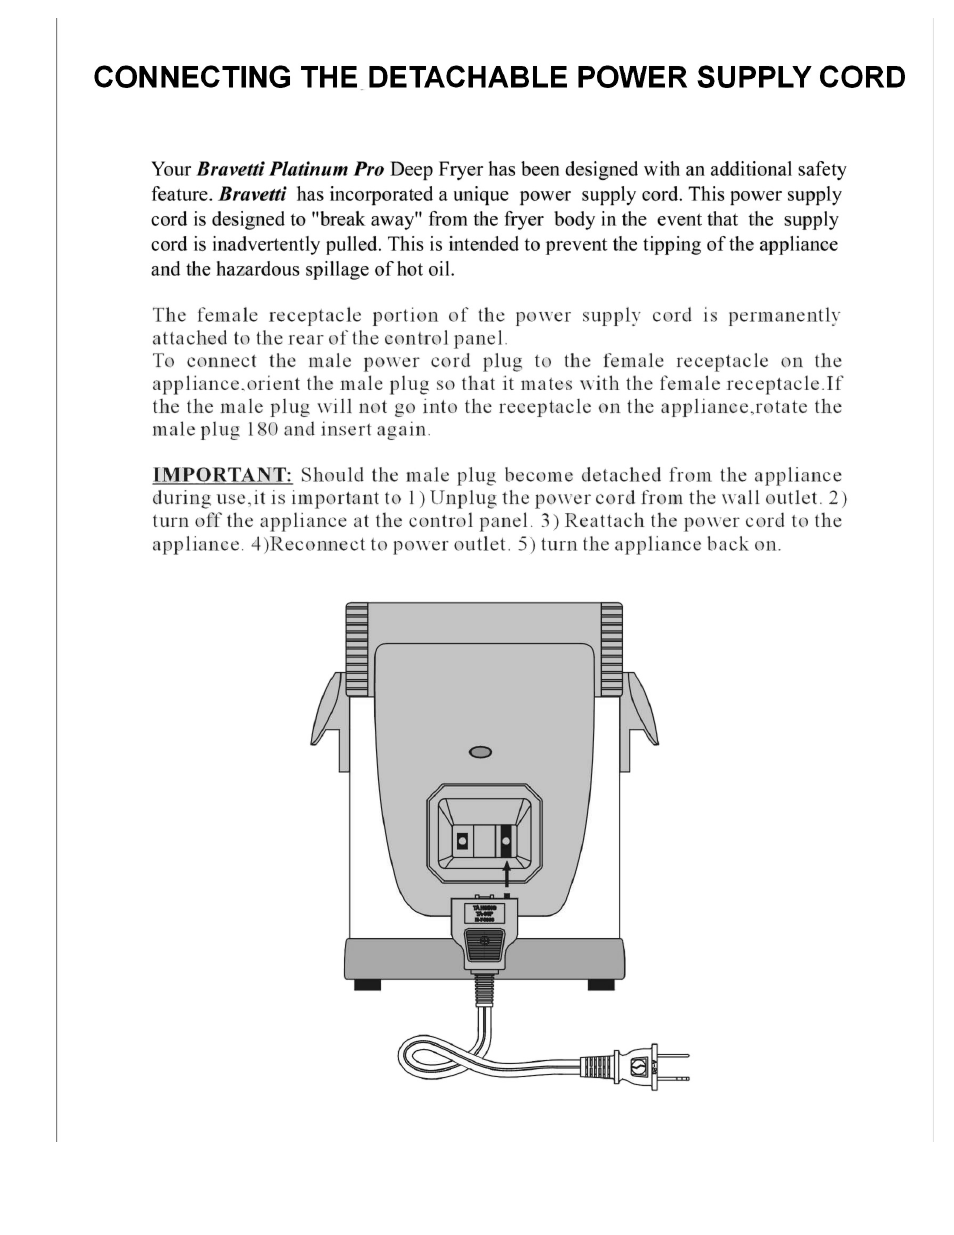 Bravetti PROFESSIONAL DEEP FRYER EP165 User Manual | Page 6 / 15